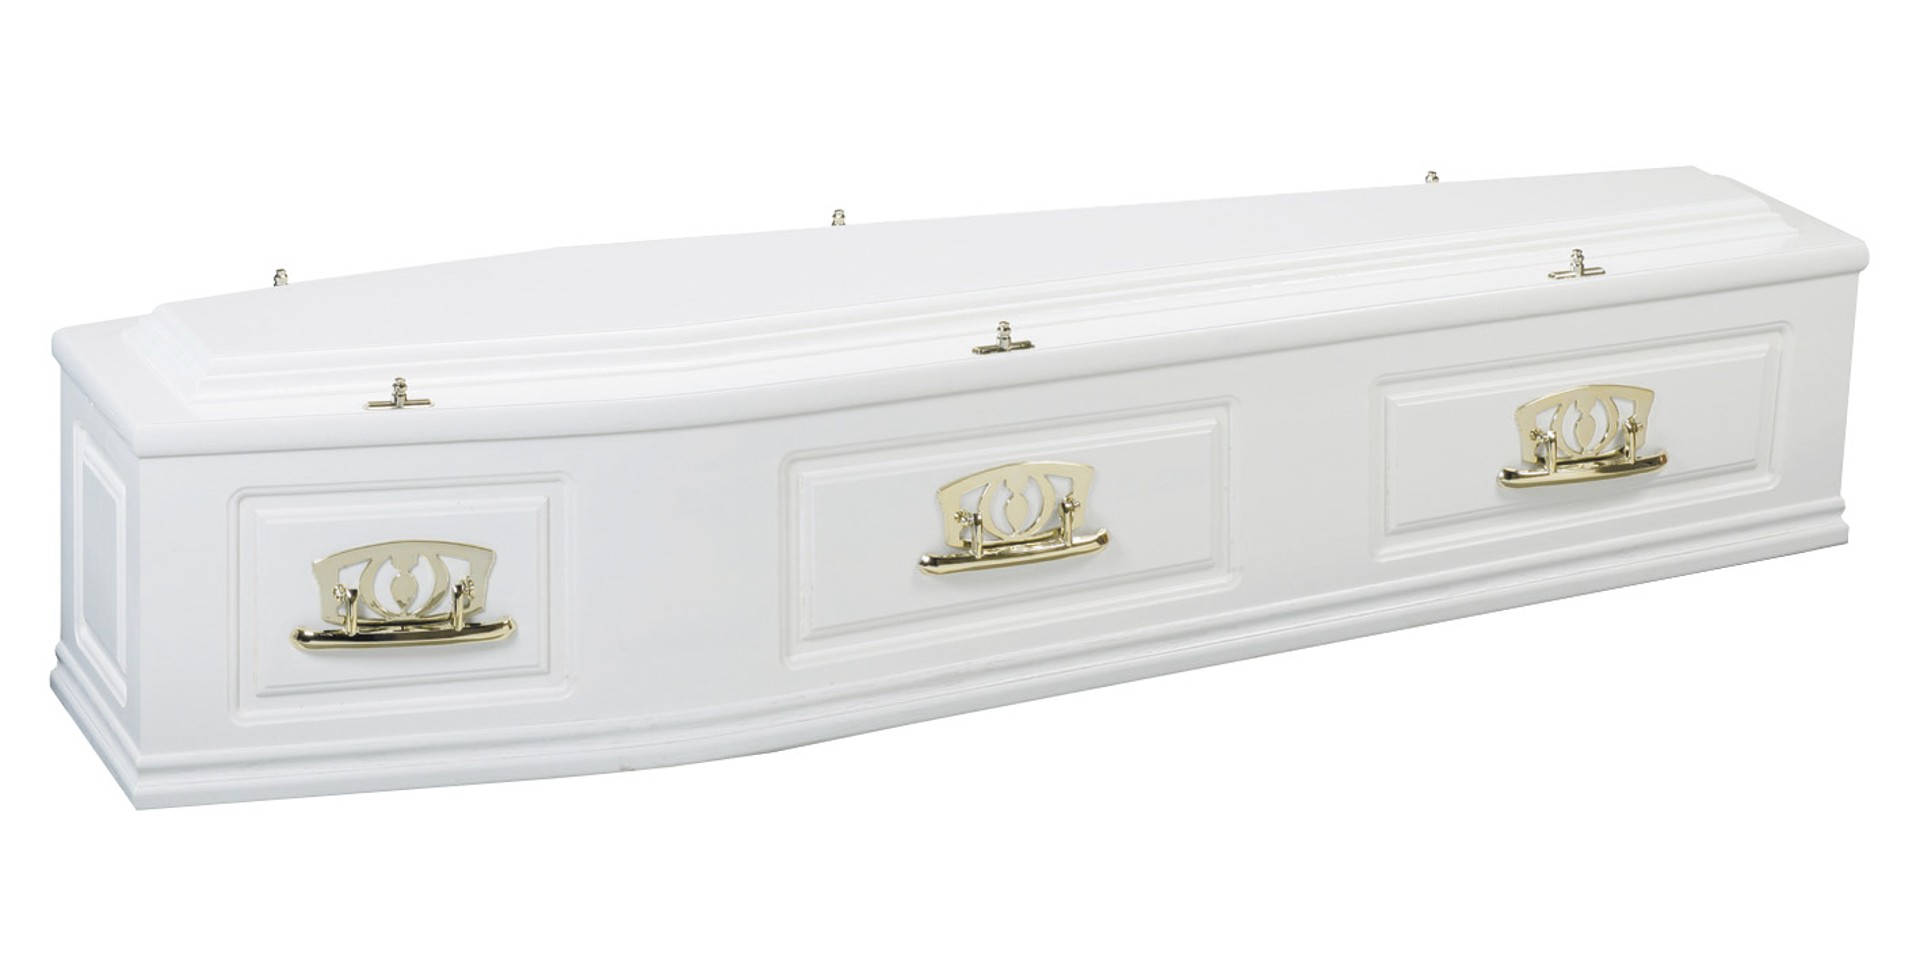 white raised lid coffin casket - funeral director in north london